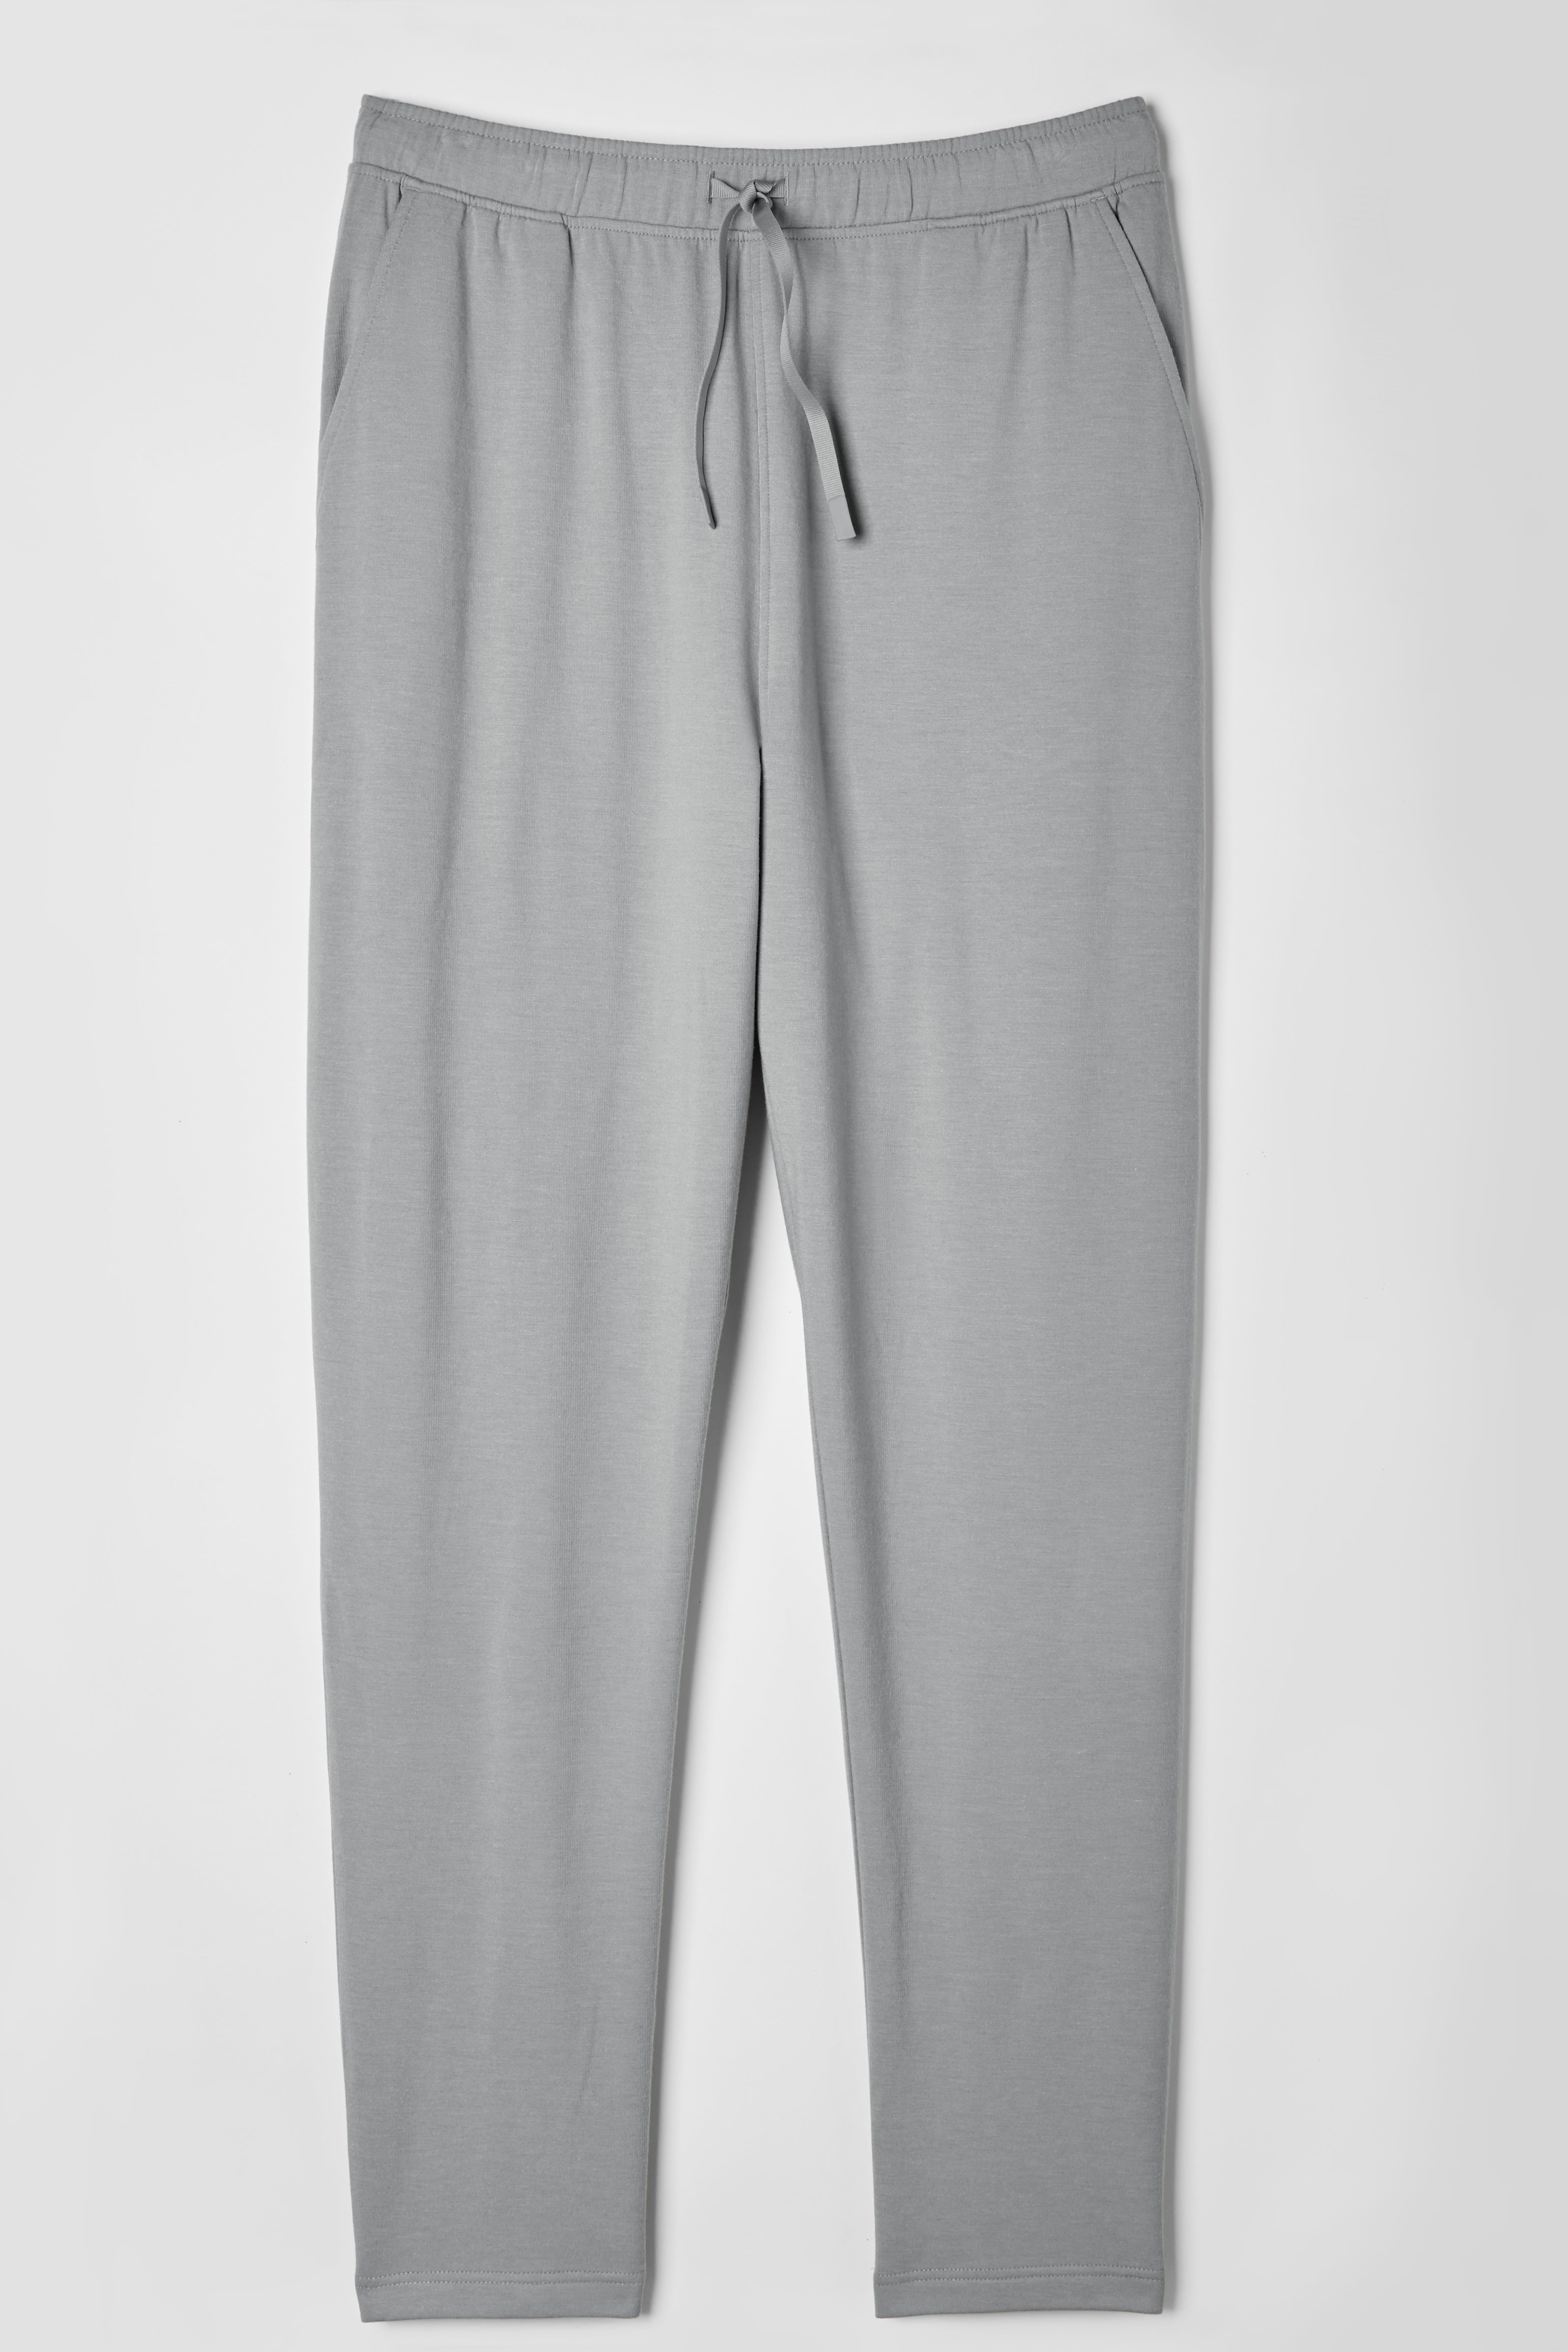 FWD Men's Woven Pant - BEST SELLING